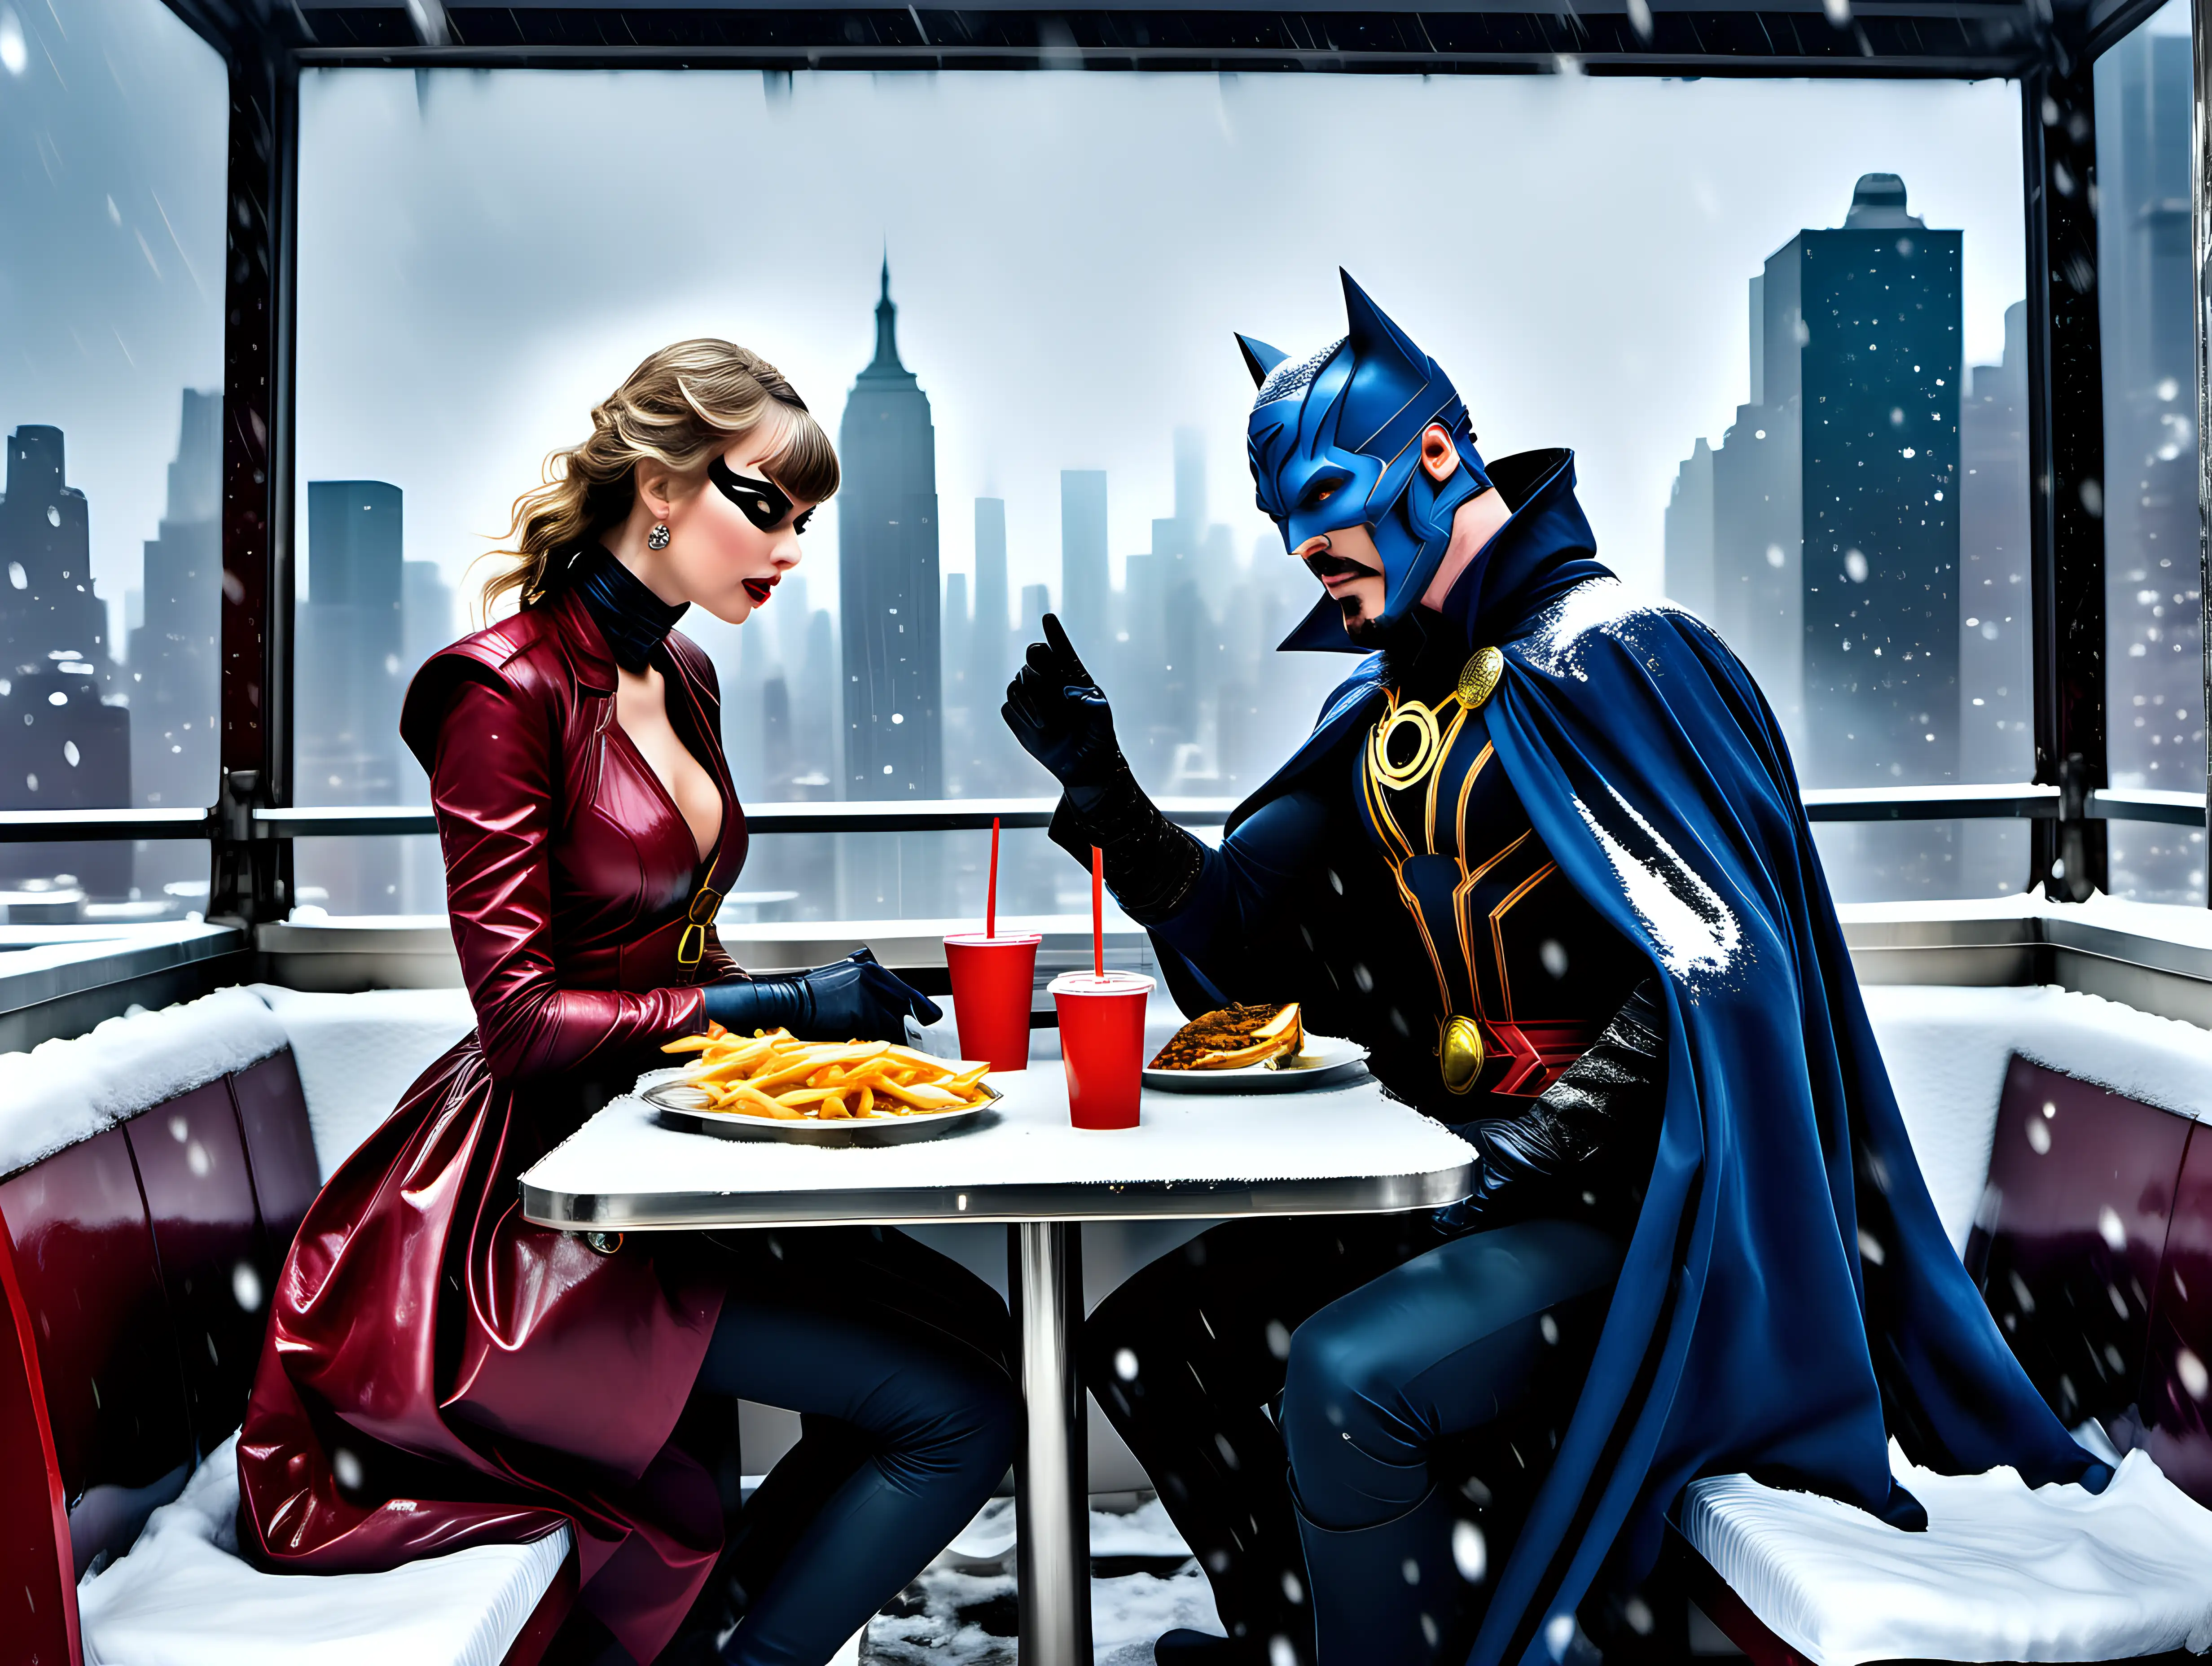 wide view Taylor Swift as Cat woman and Doctor Strange on a date in a fast food joint overlooking NYC during a snow storm Frank Frazetta style